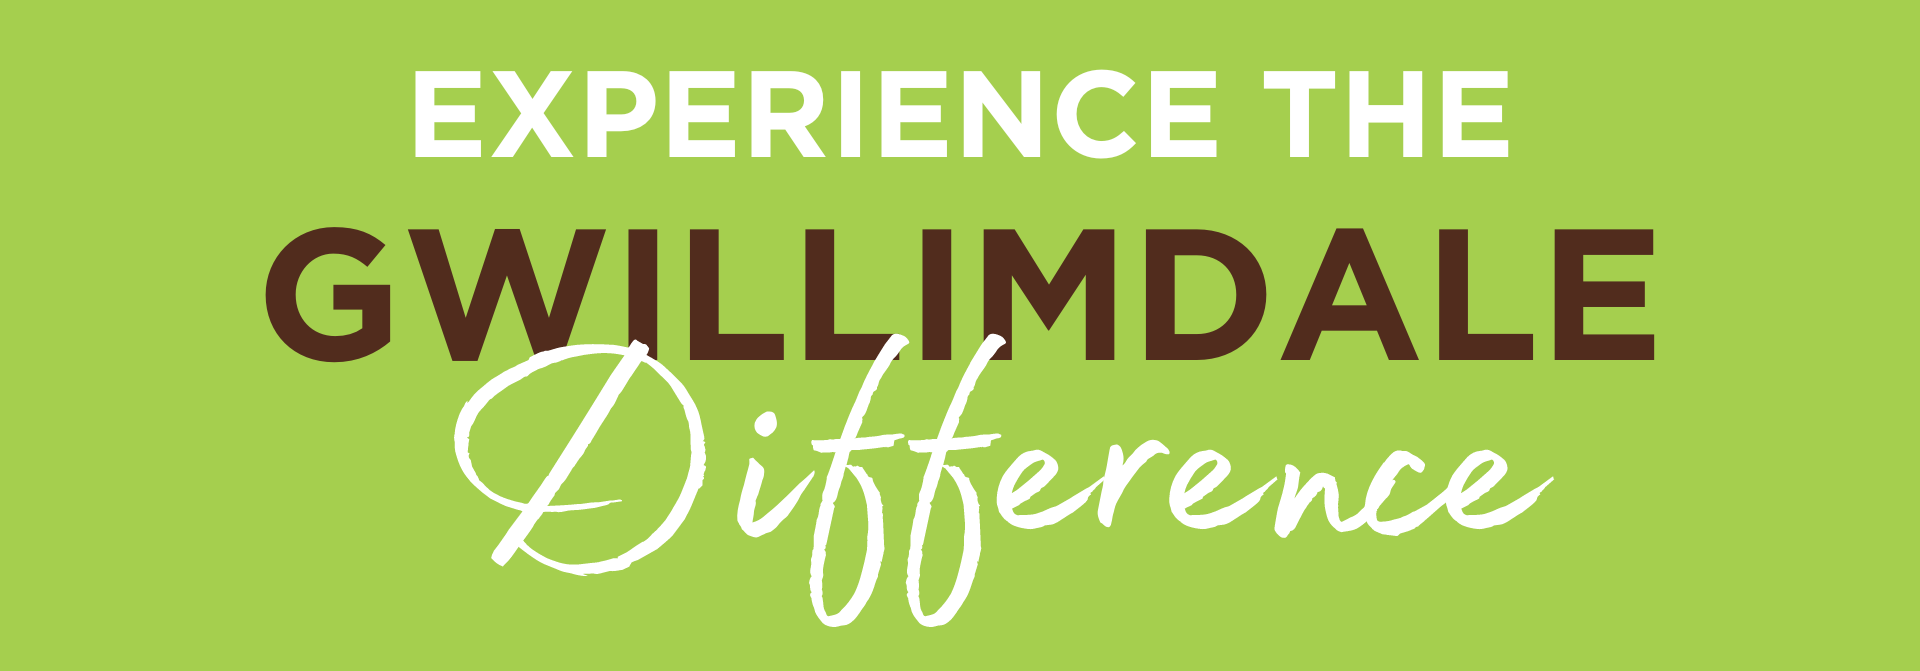 Experience the Gwillimdale Difference